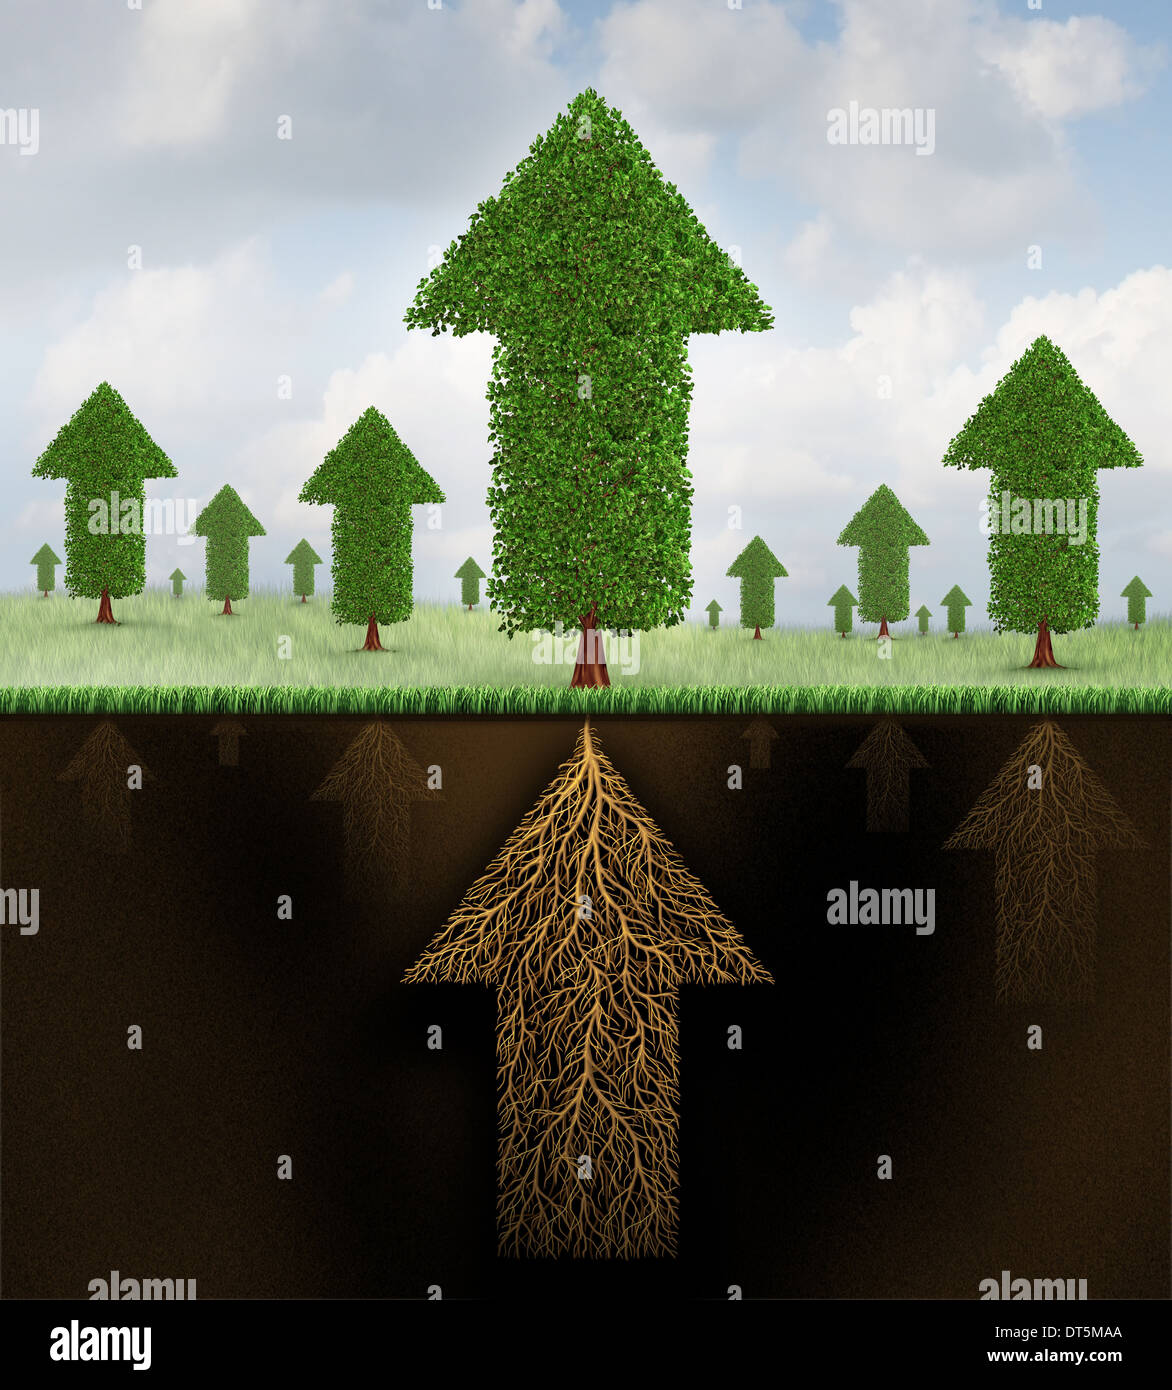 Financial stability and strong growing economy metaphor as a group of trees shaped as arrows and a root system shaped as as an arrow pointing up towards succees as a business symbol of economic teamwork strength. Stock Photo